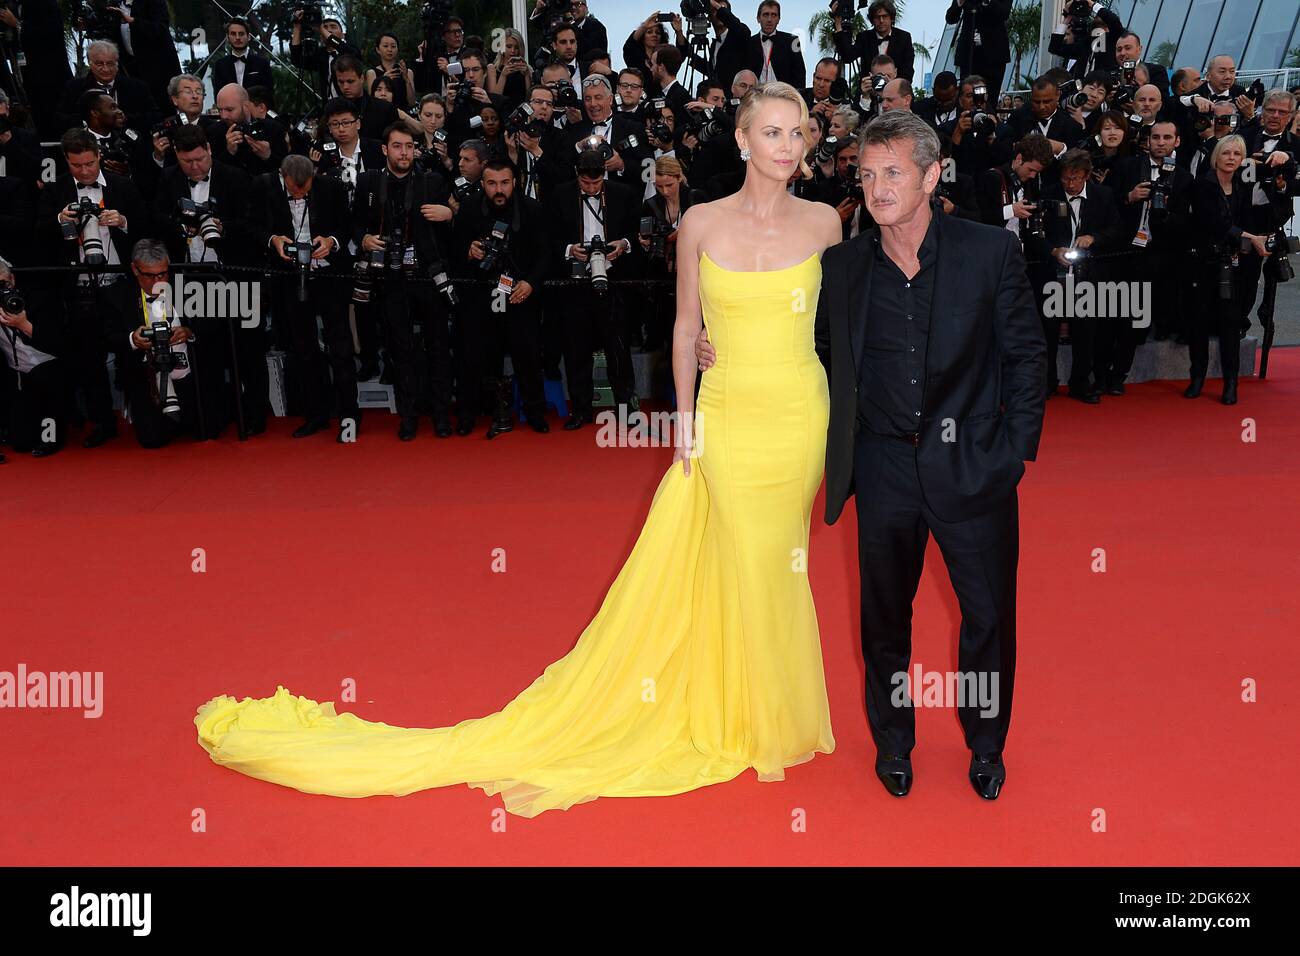 Charlize Theron And Sean Penn Attending The Mad Max Fury Road Premiere Taking Place During The